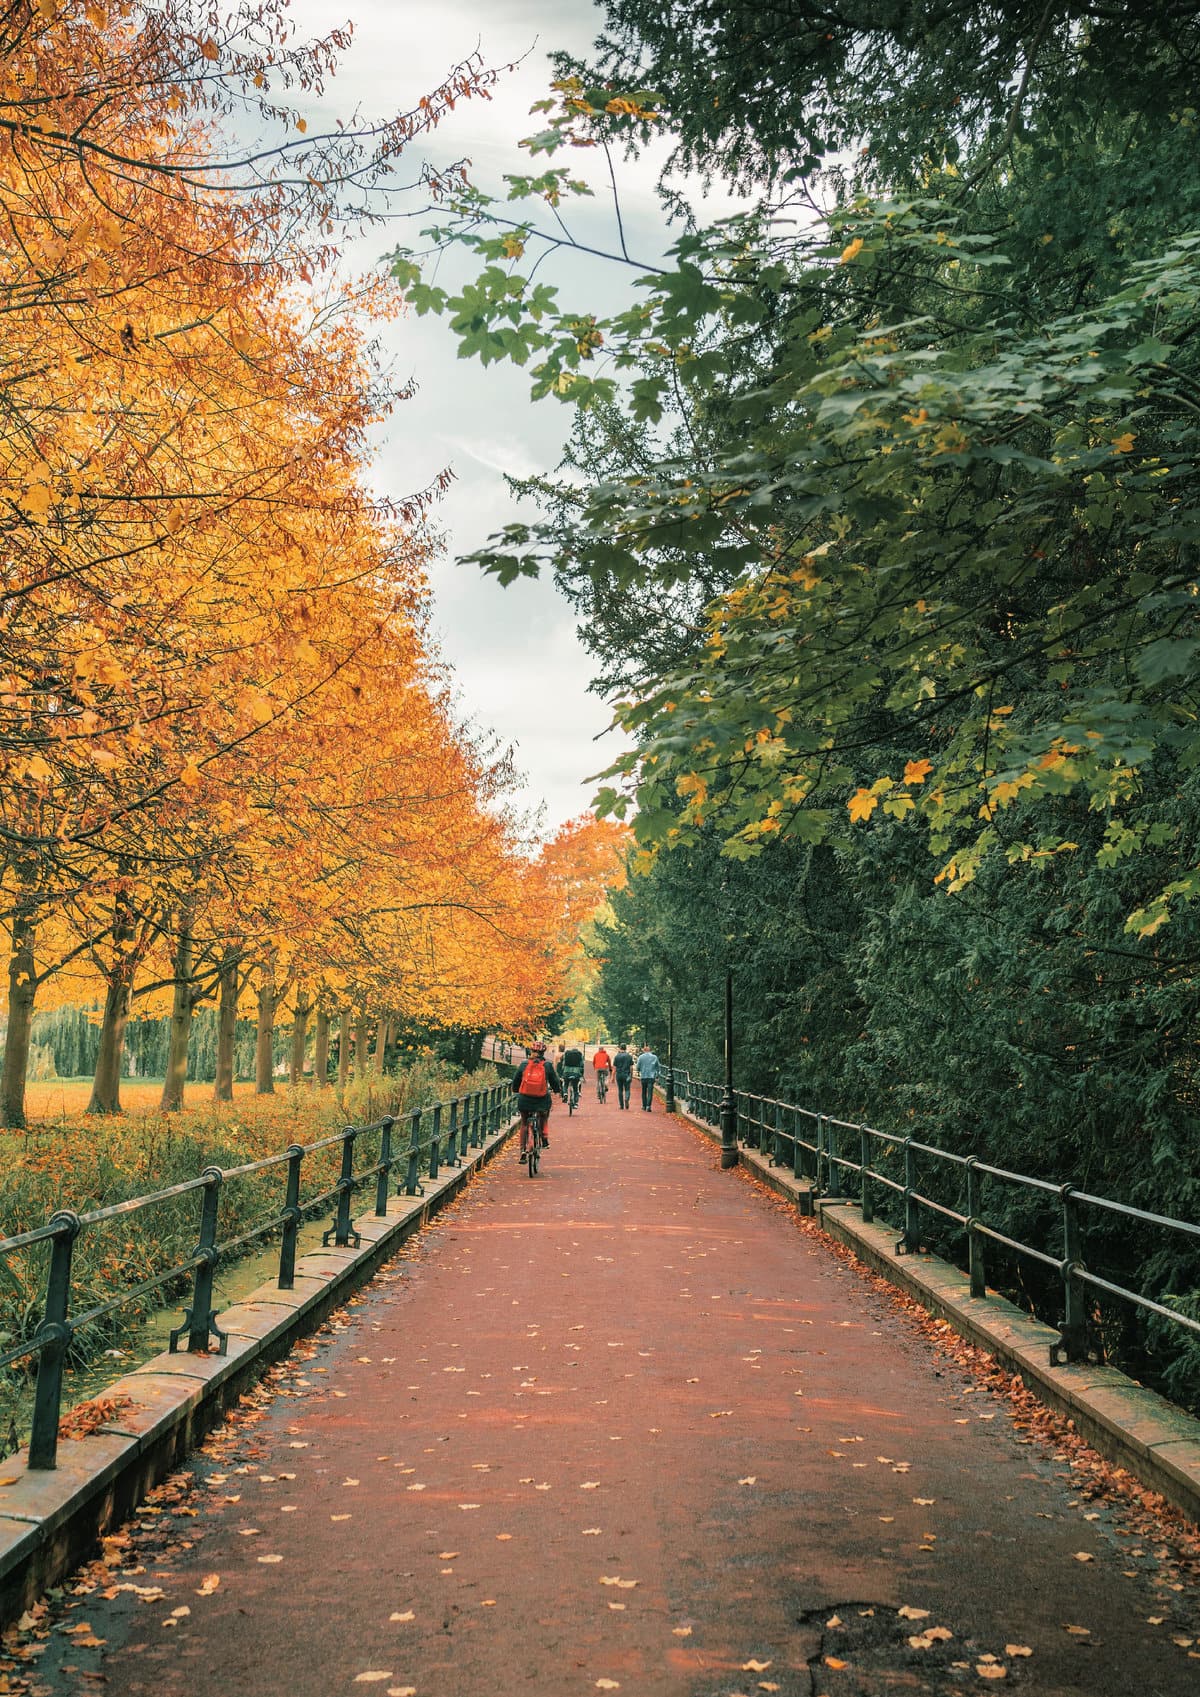 Cyclists along the Cambridge cycling route in autumn